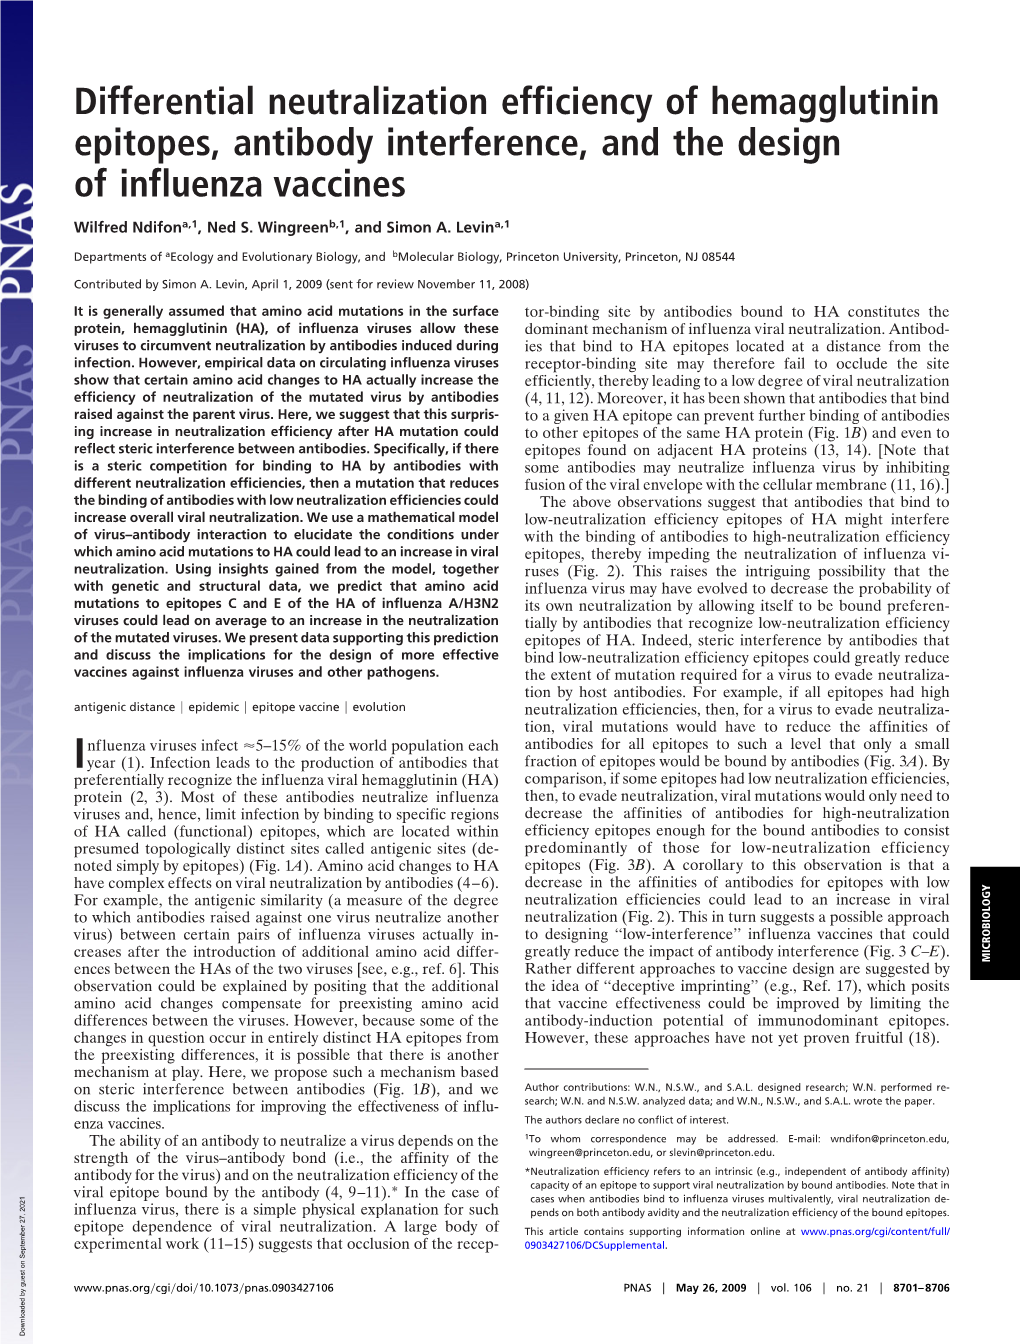 Differential Neutralization Efficiency of Hemagglutinin Epitopes, Antibody Interference, and the Design of Influenza Vaccines